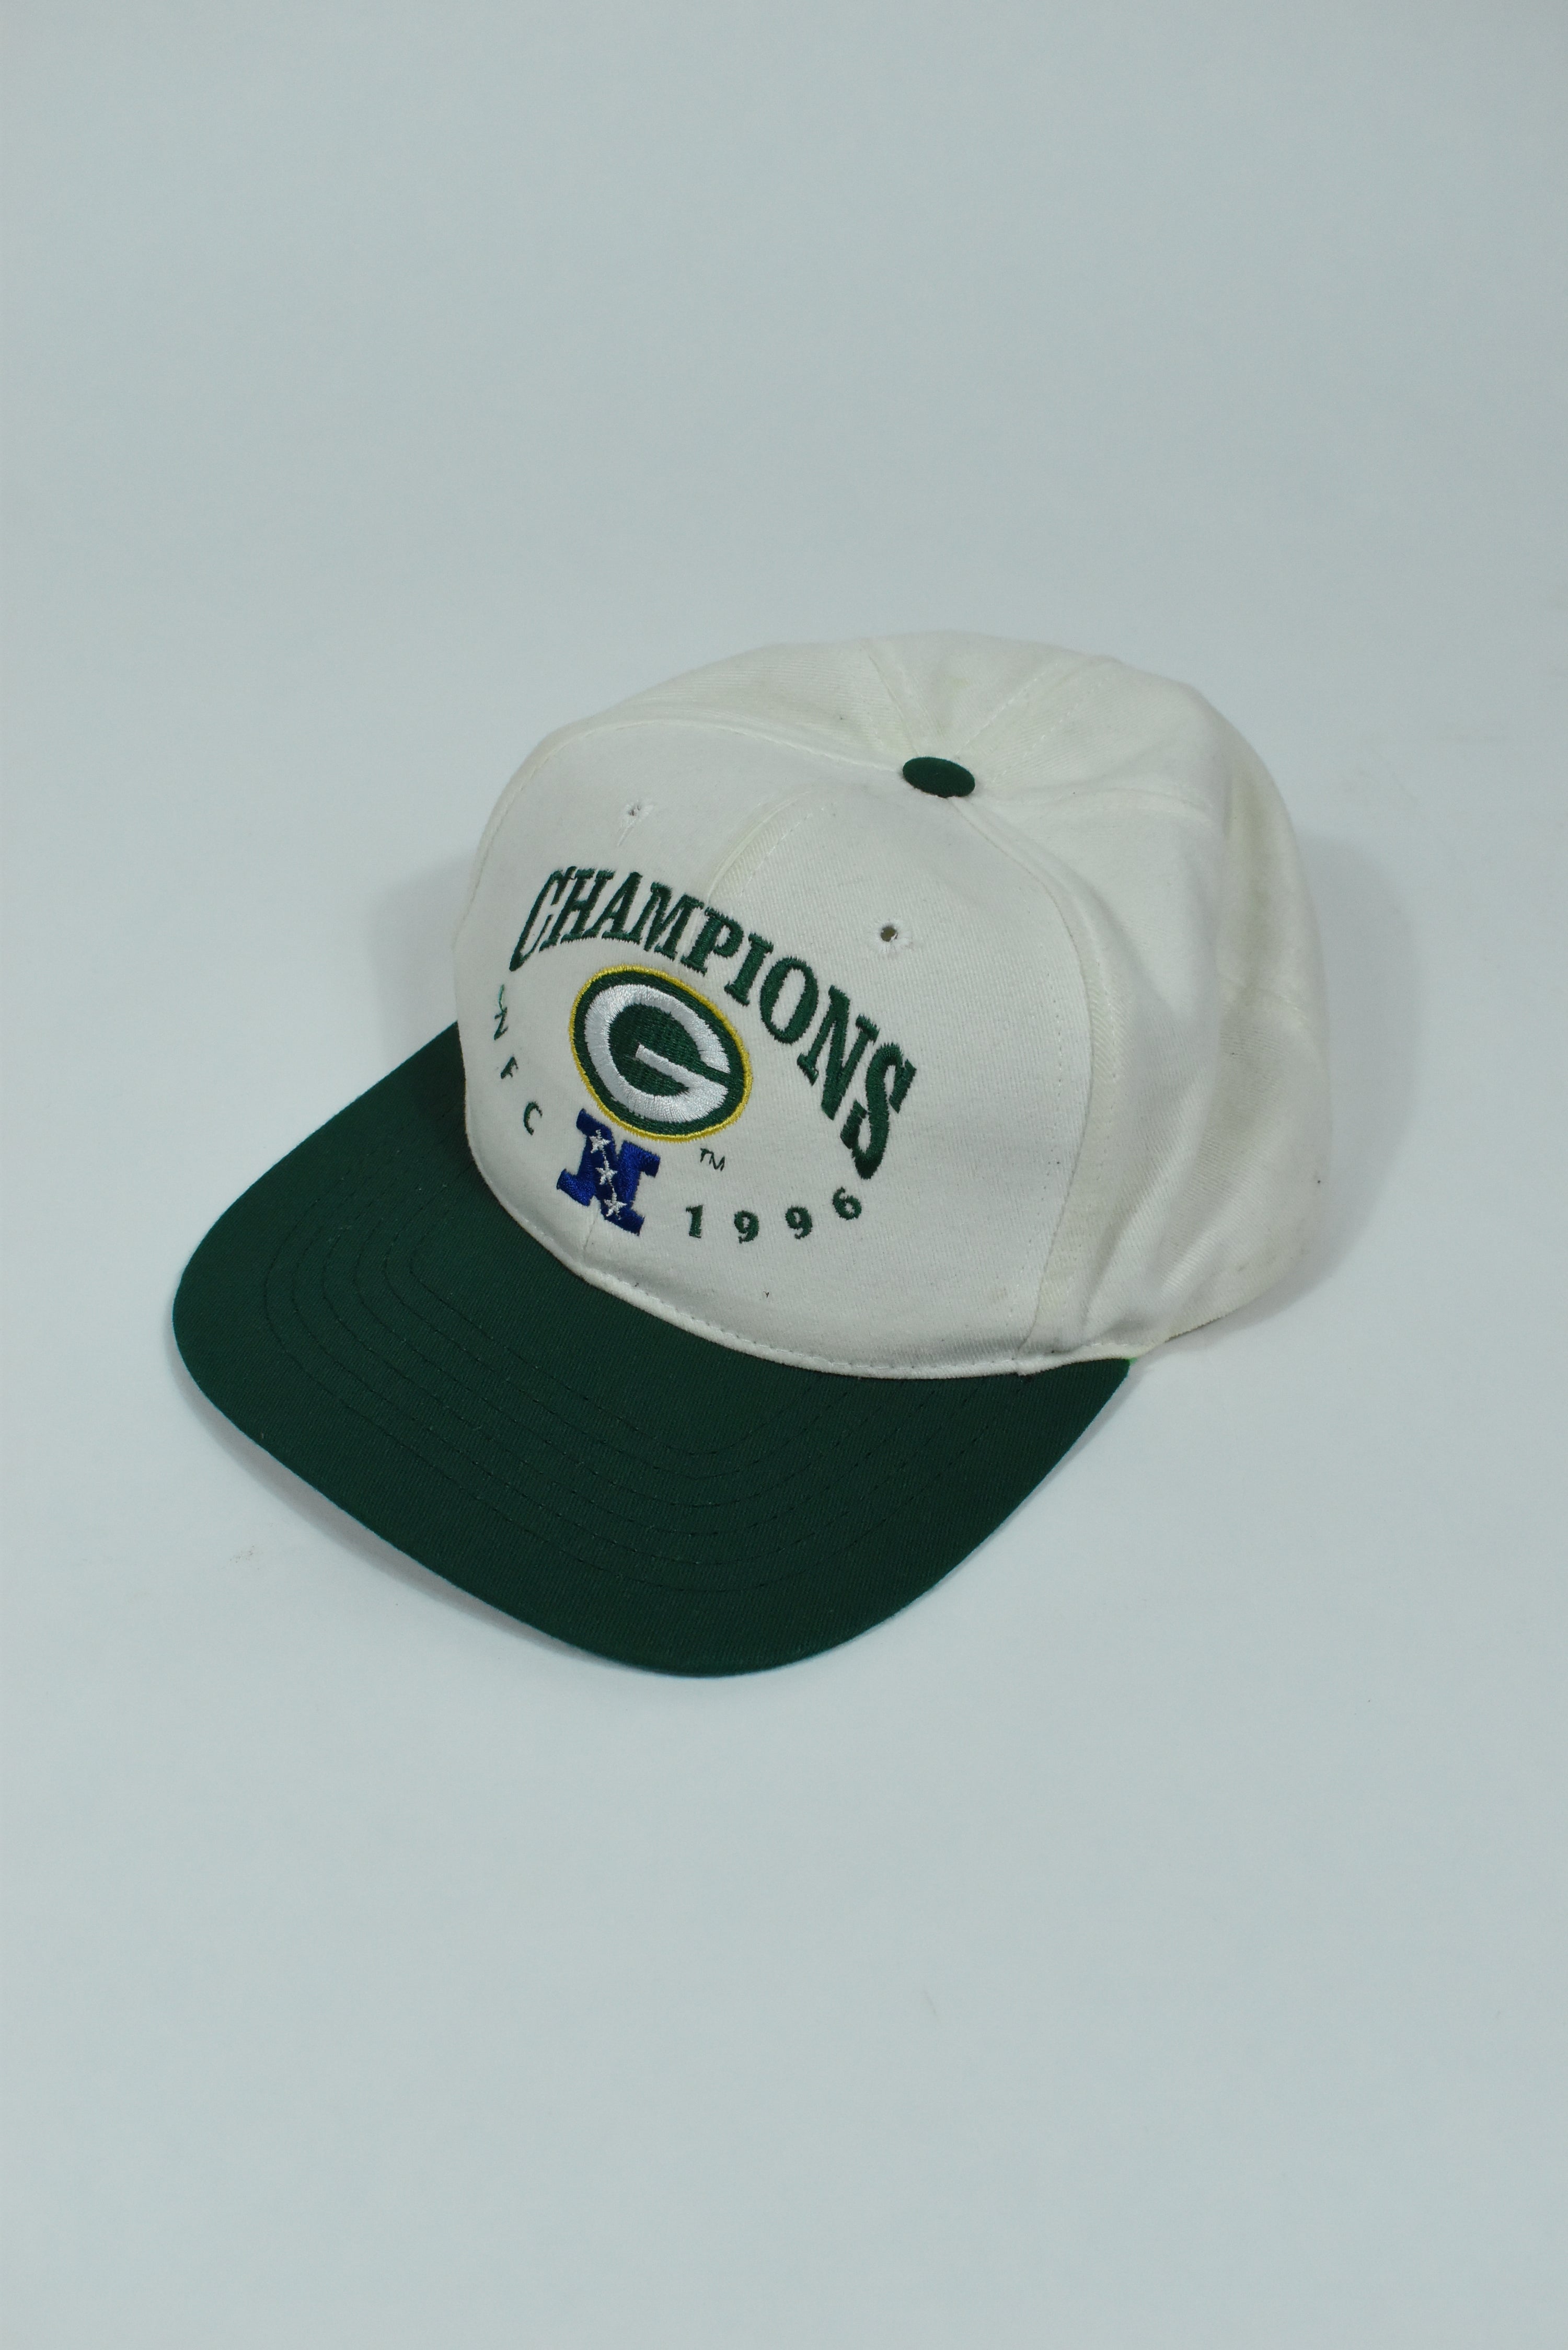 Vintage Green Bay Packers 1996 Embroidery Hat OS